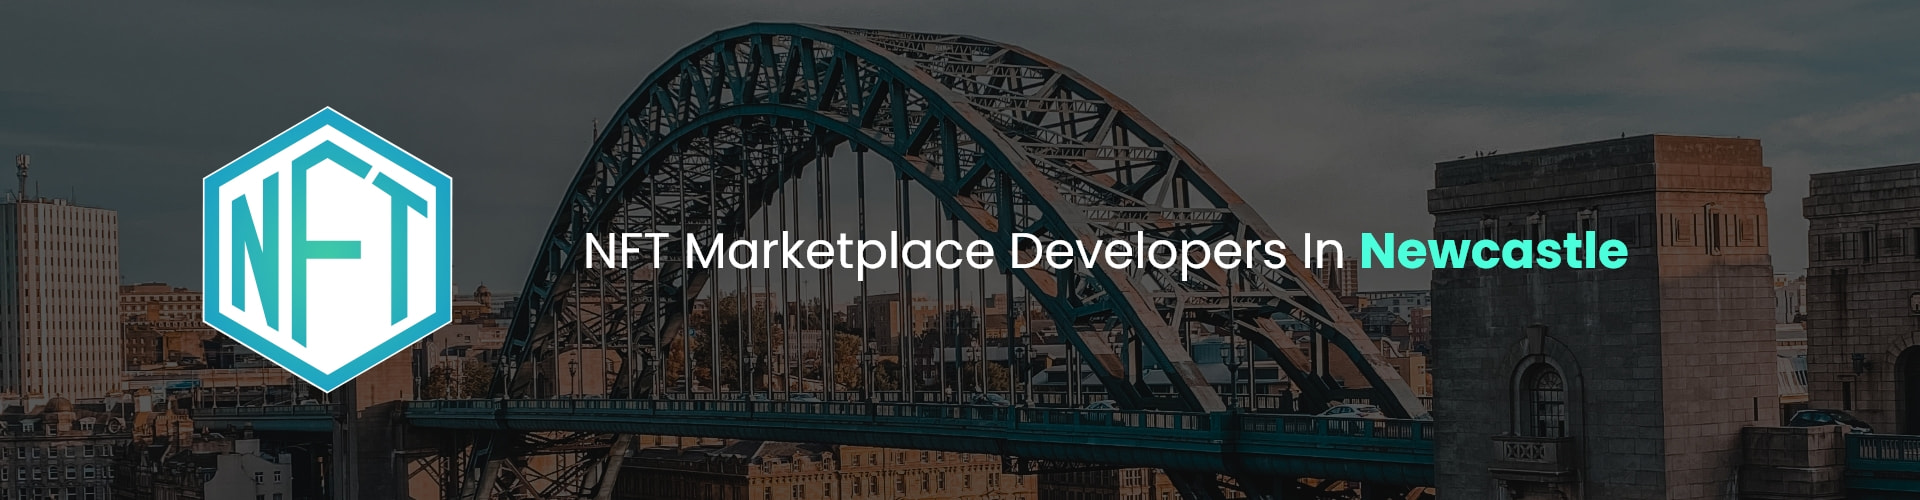 hire nft marketplace developers in newcastle